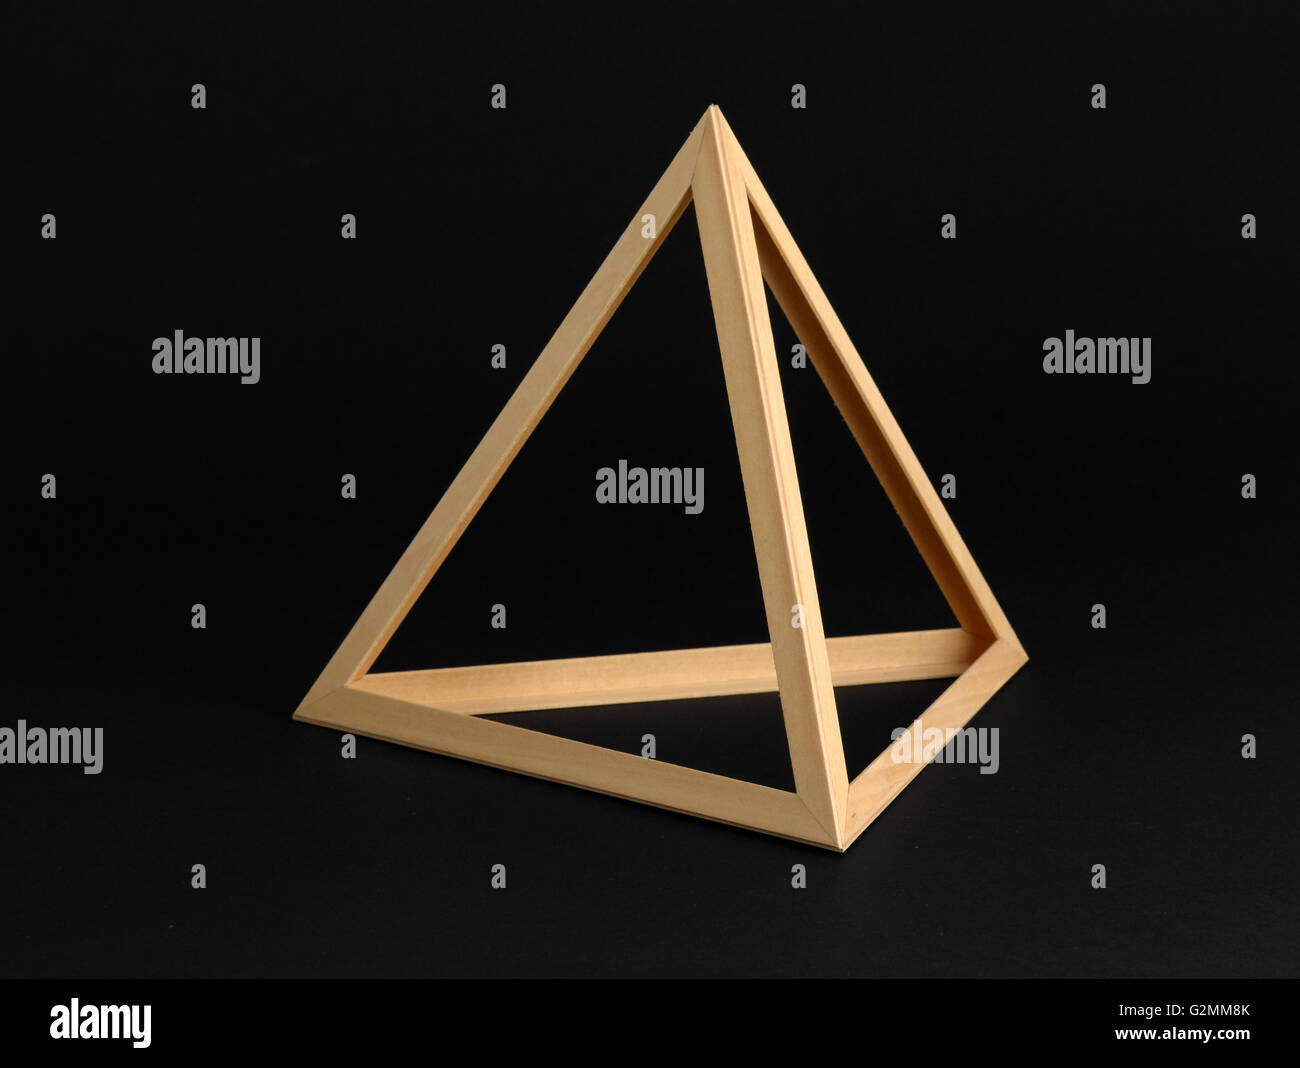 Three dimensional geometric wooden triangular frame isolated on a black background Stock Photo